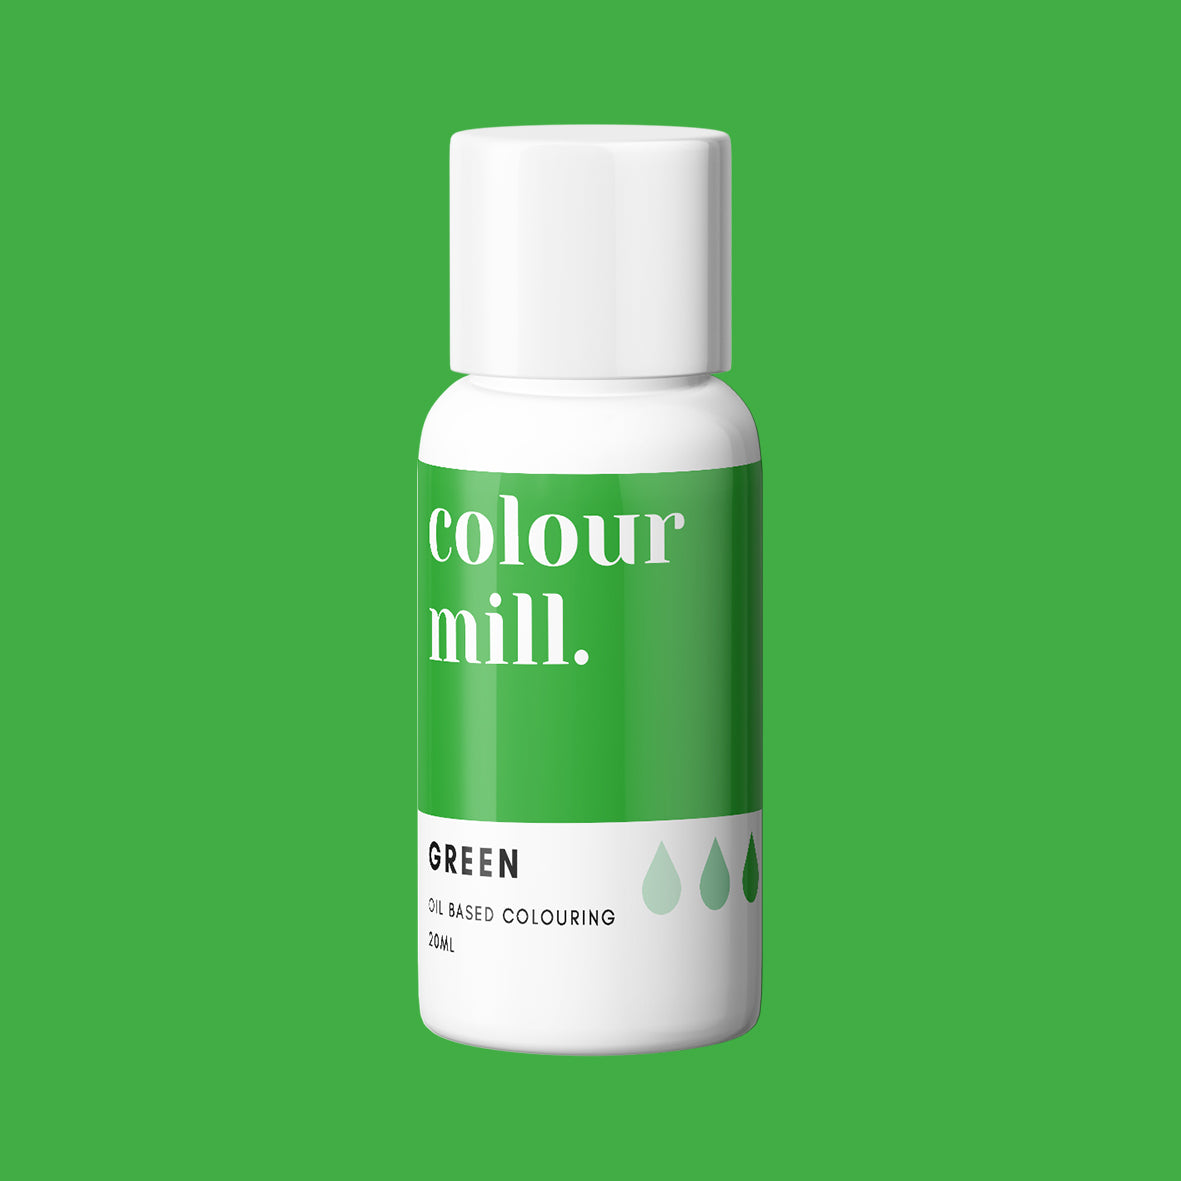 GREEN oil based concentrated icing colouring 20ml